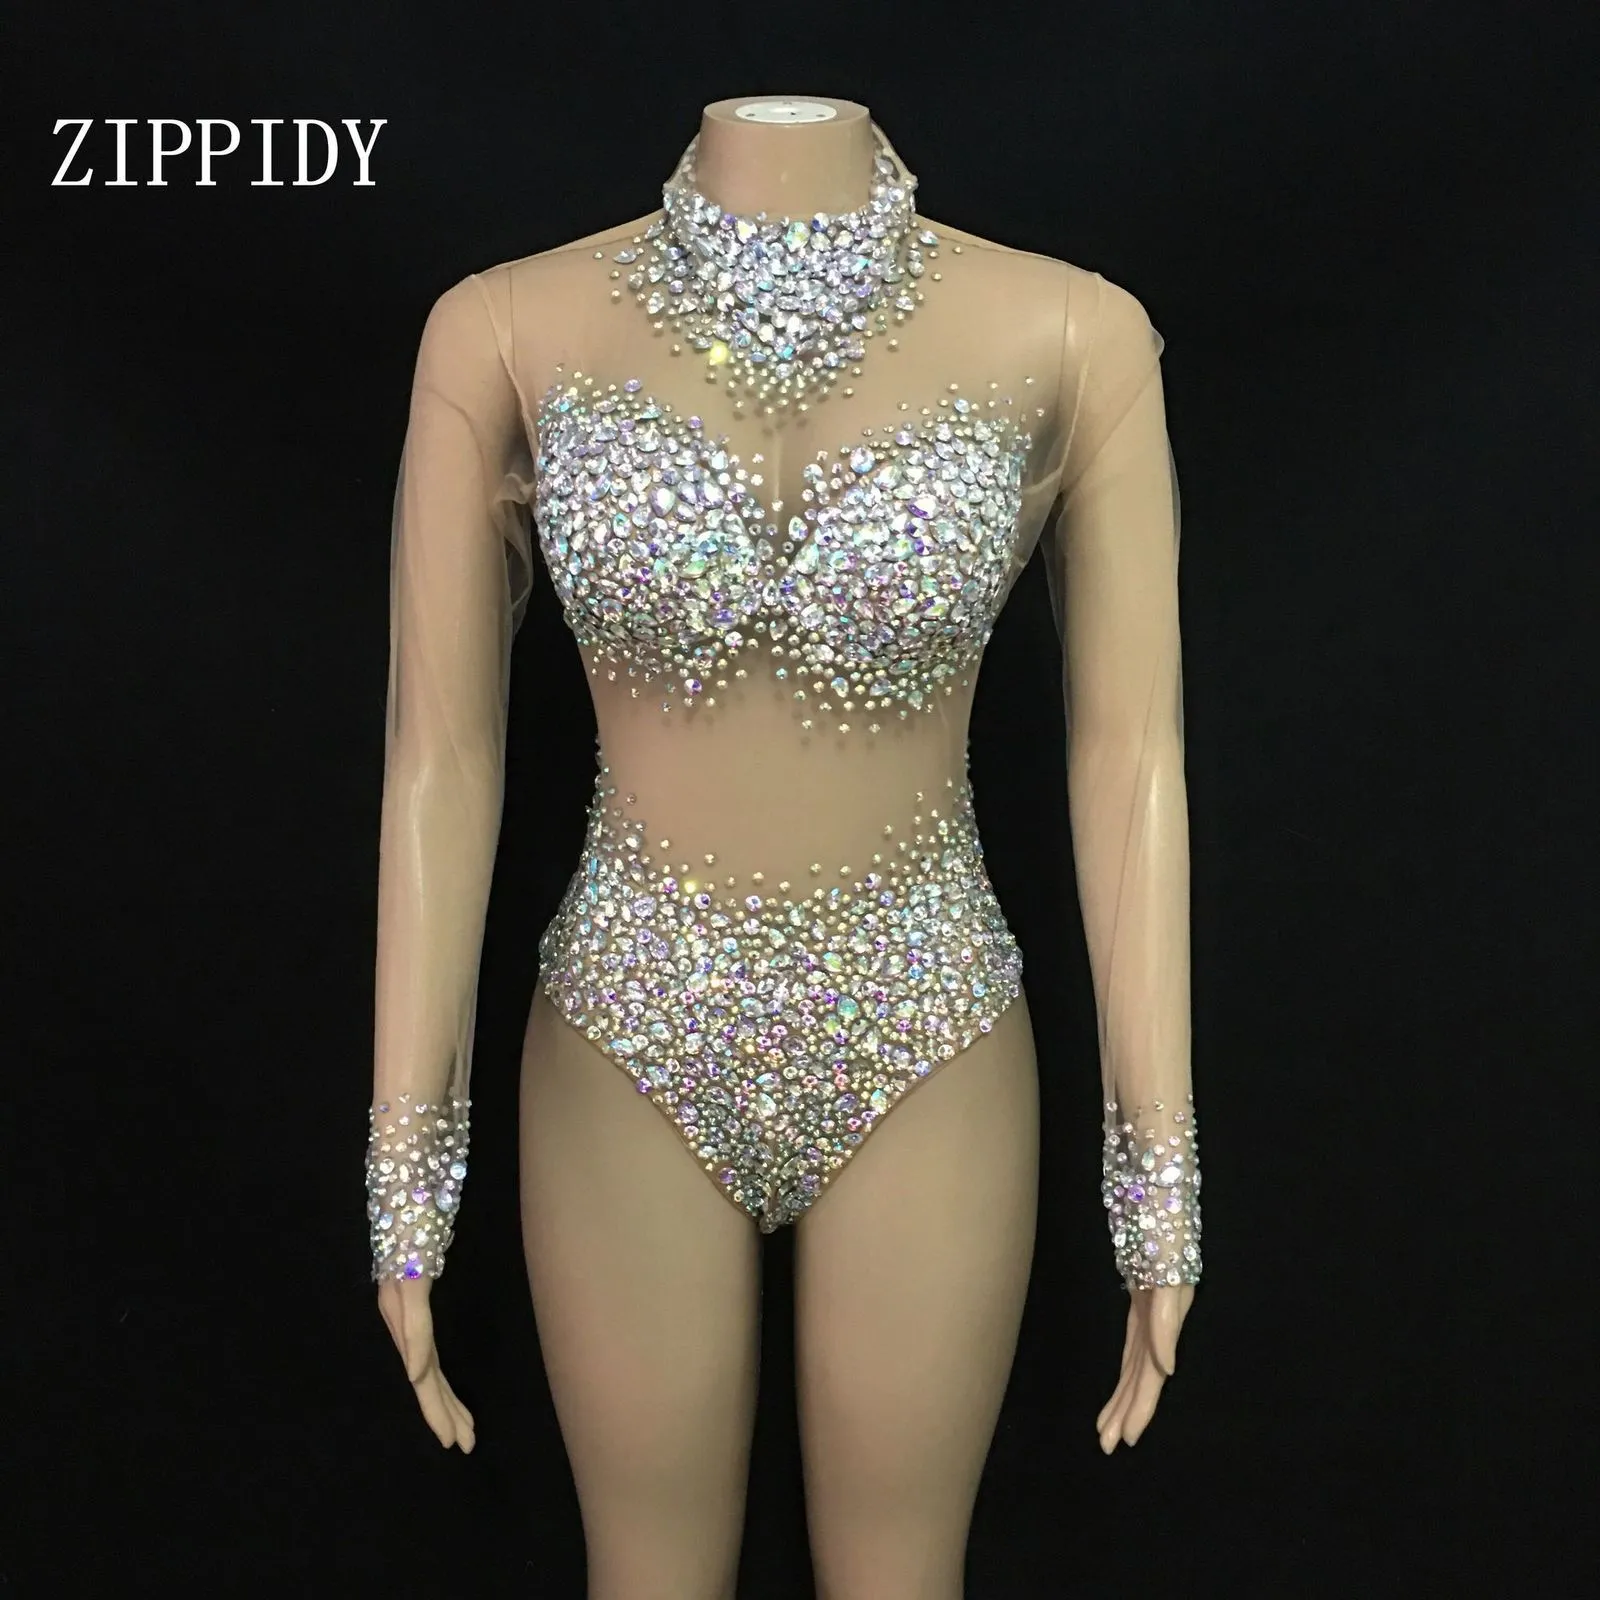 Women's Jumpsuits Rompers Sexy AB s Mesh Bodysuit Birthday Celebrate Wear Female Singer Show Evening Prom Party Stage 230830